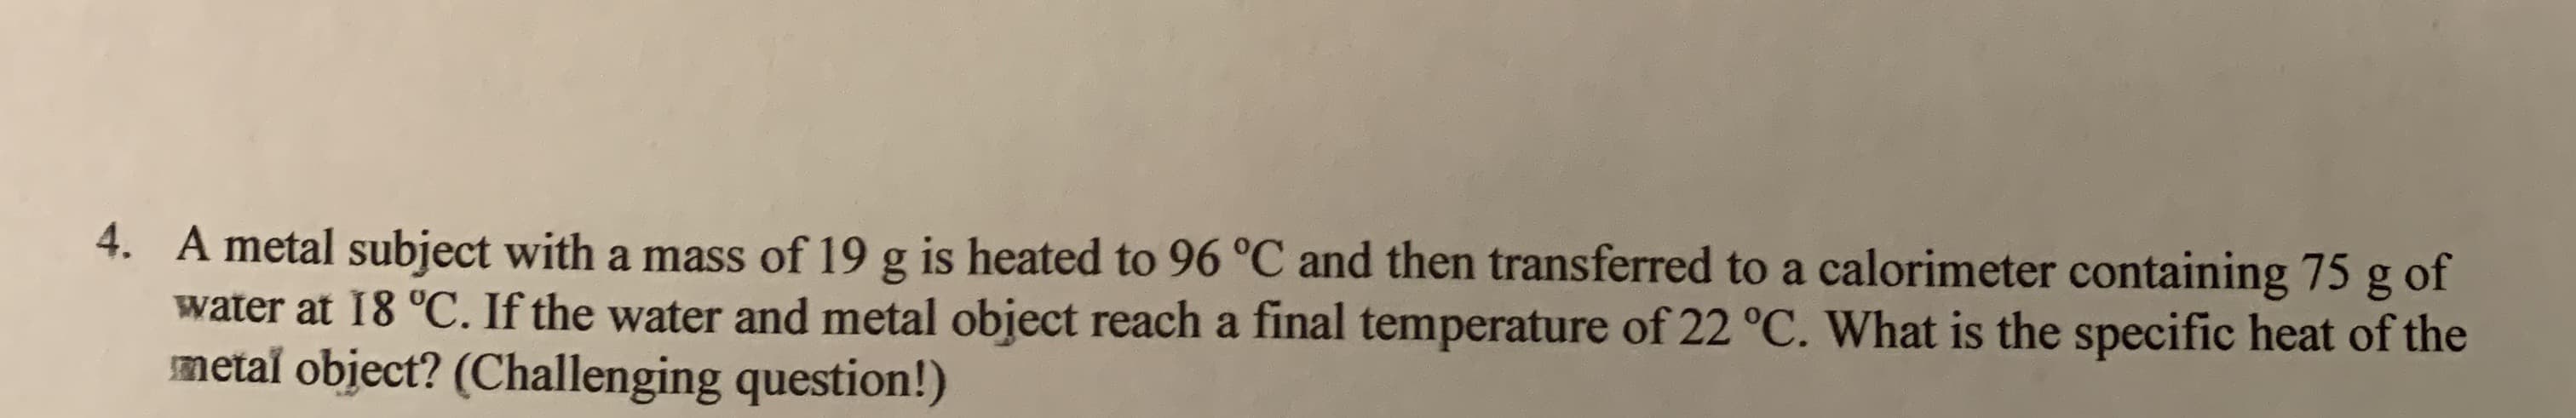 4. A metal subject with a mass of 19 g is heated to 96 °C and then transferred to a calorimeter containing 75 g of
water at 18 °C. If the water and metal object reach a final temperature of 22 °C. What is the specific heat of the
metal object? (Challenging question!)
